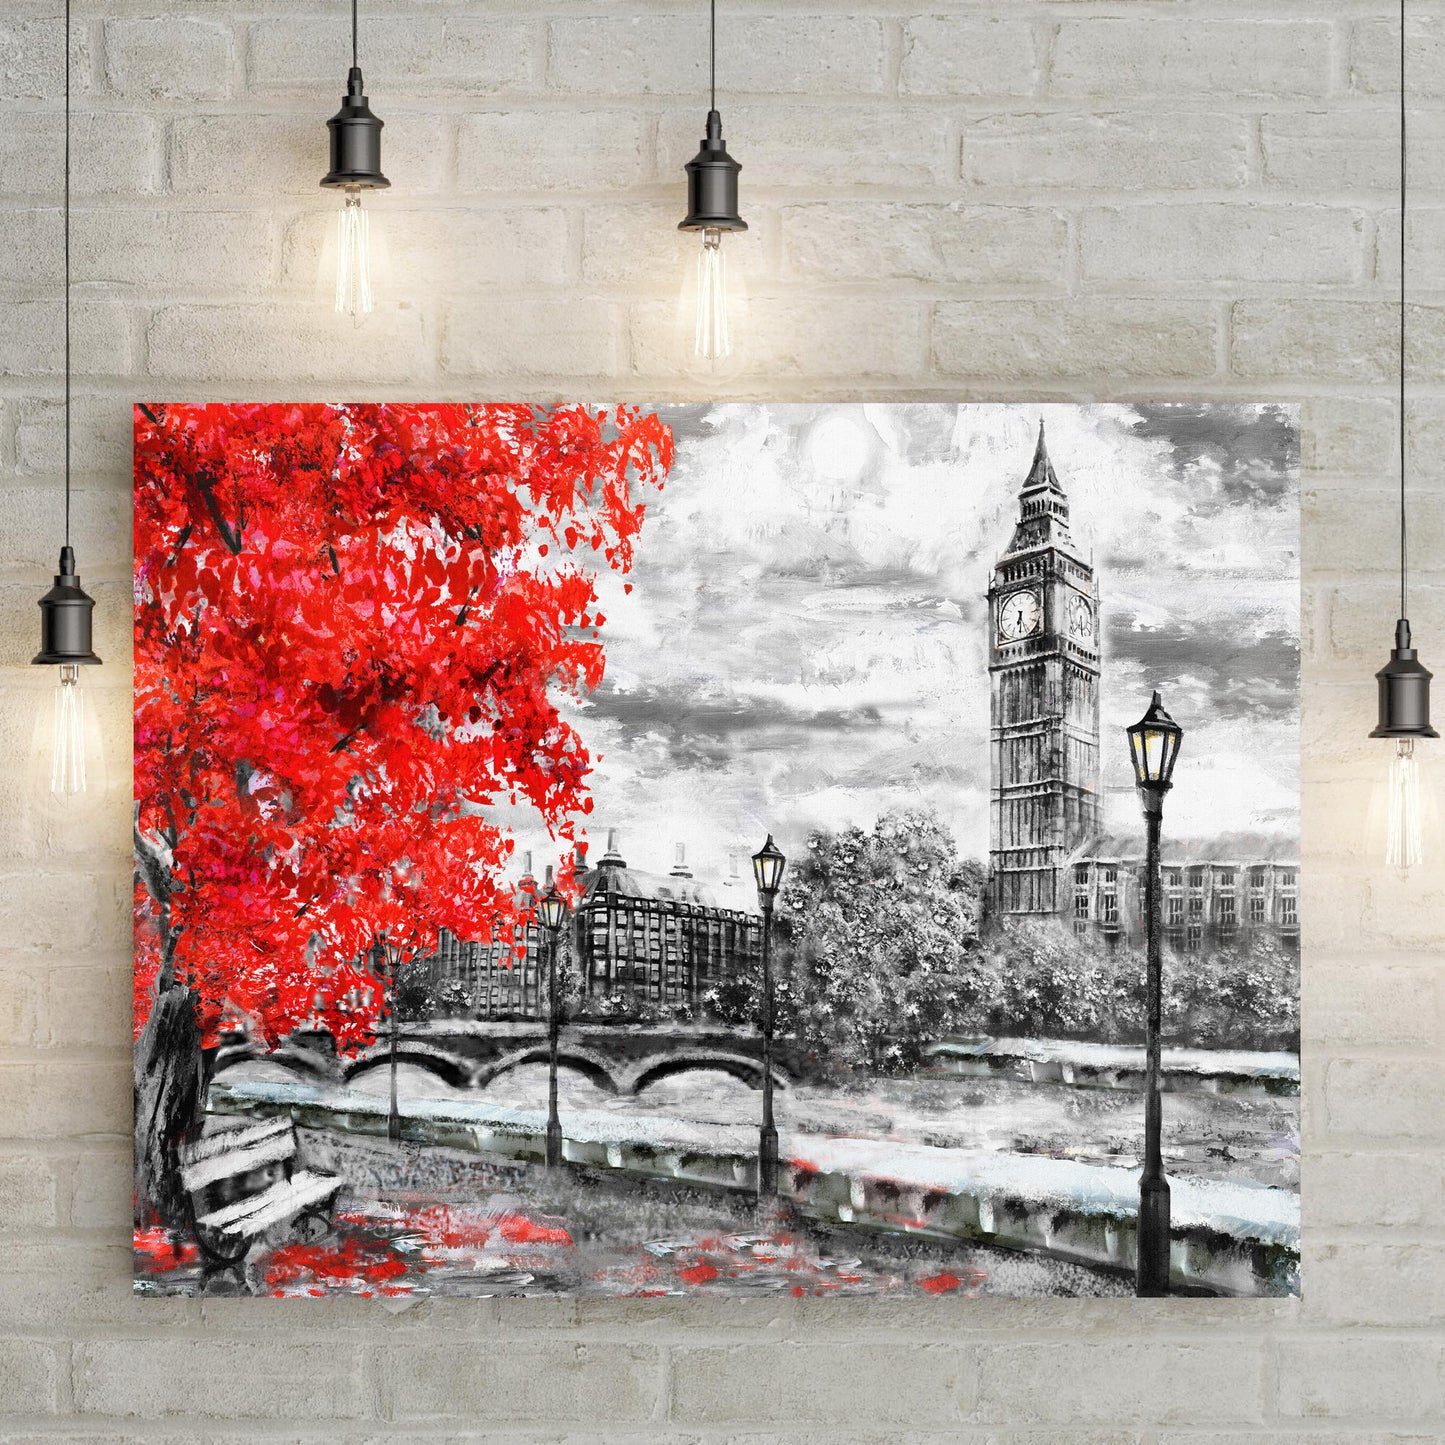 Stunning Red Autumn Tree Wall Art Canvas - Image by Tailored Canvases